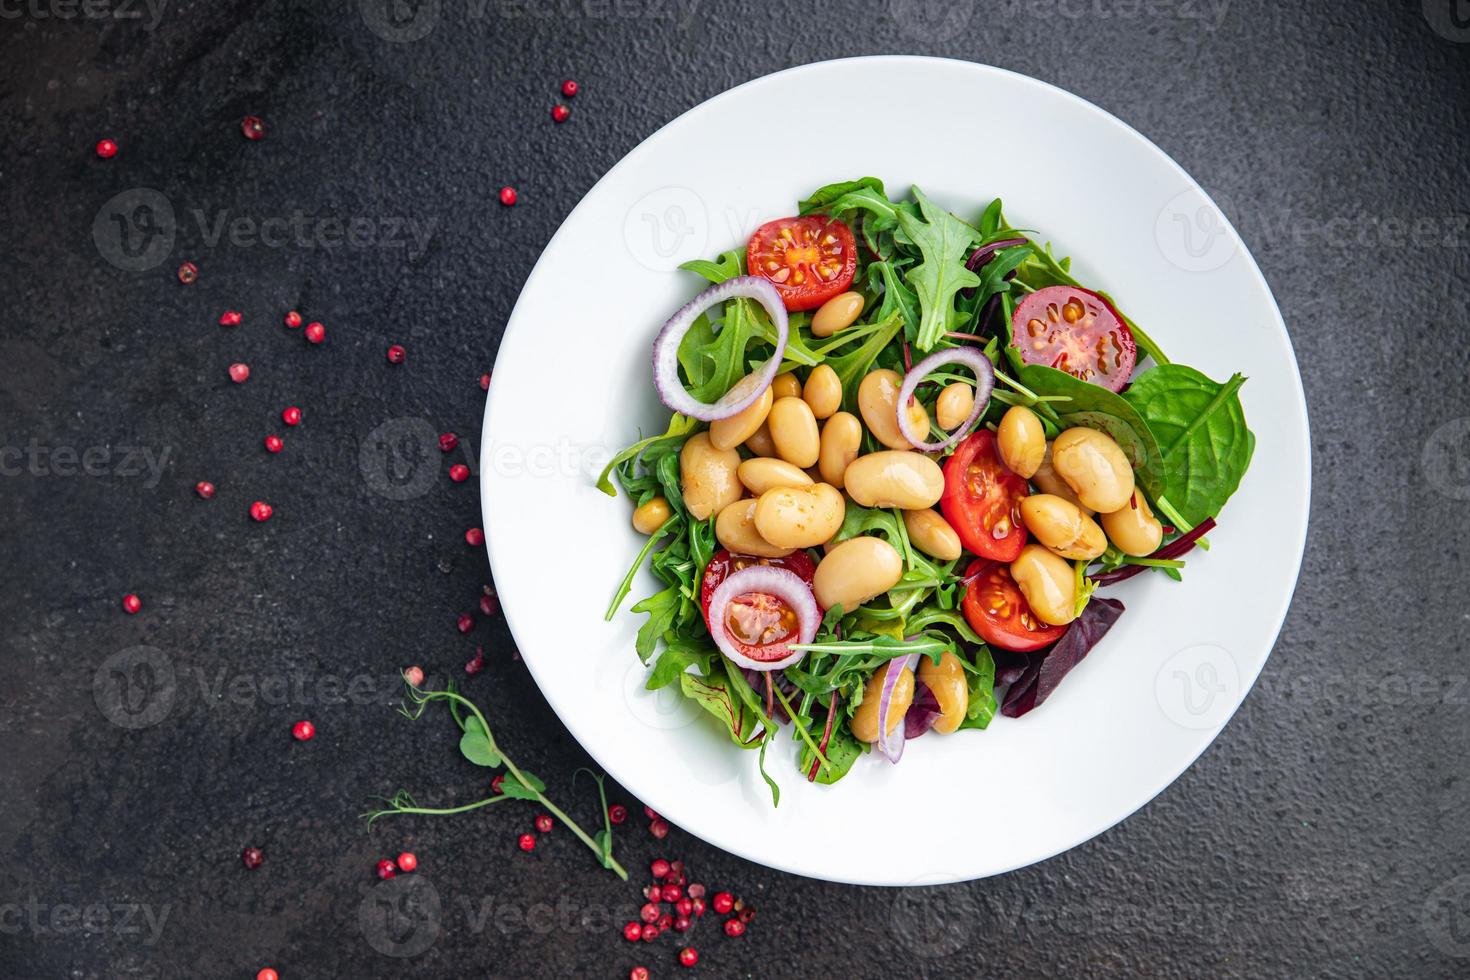 salad white beans, tomato, leaves lettuce mix petals fresh portion healthy meal food photo